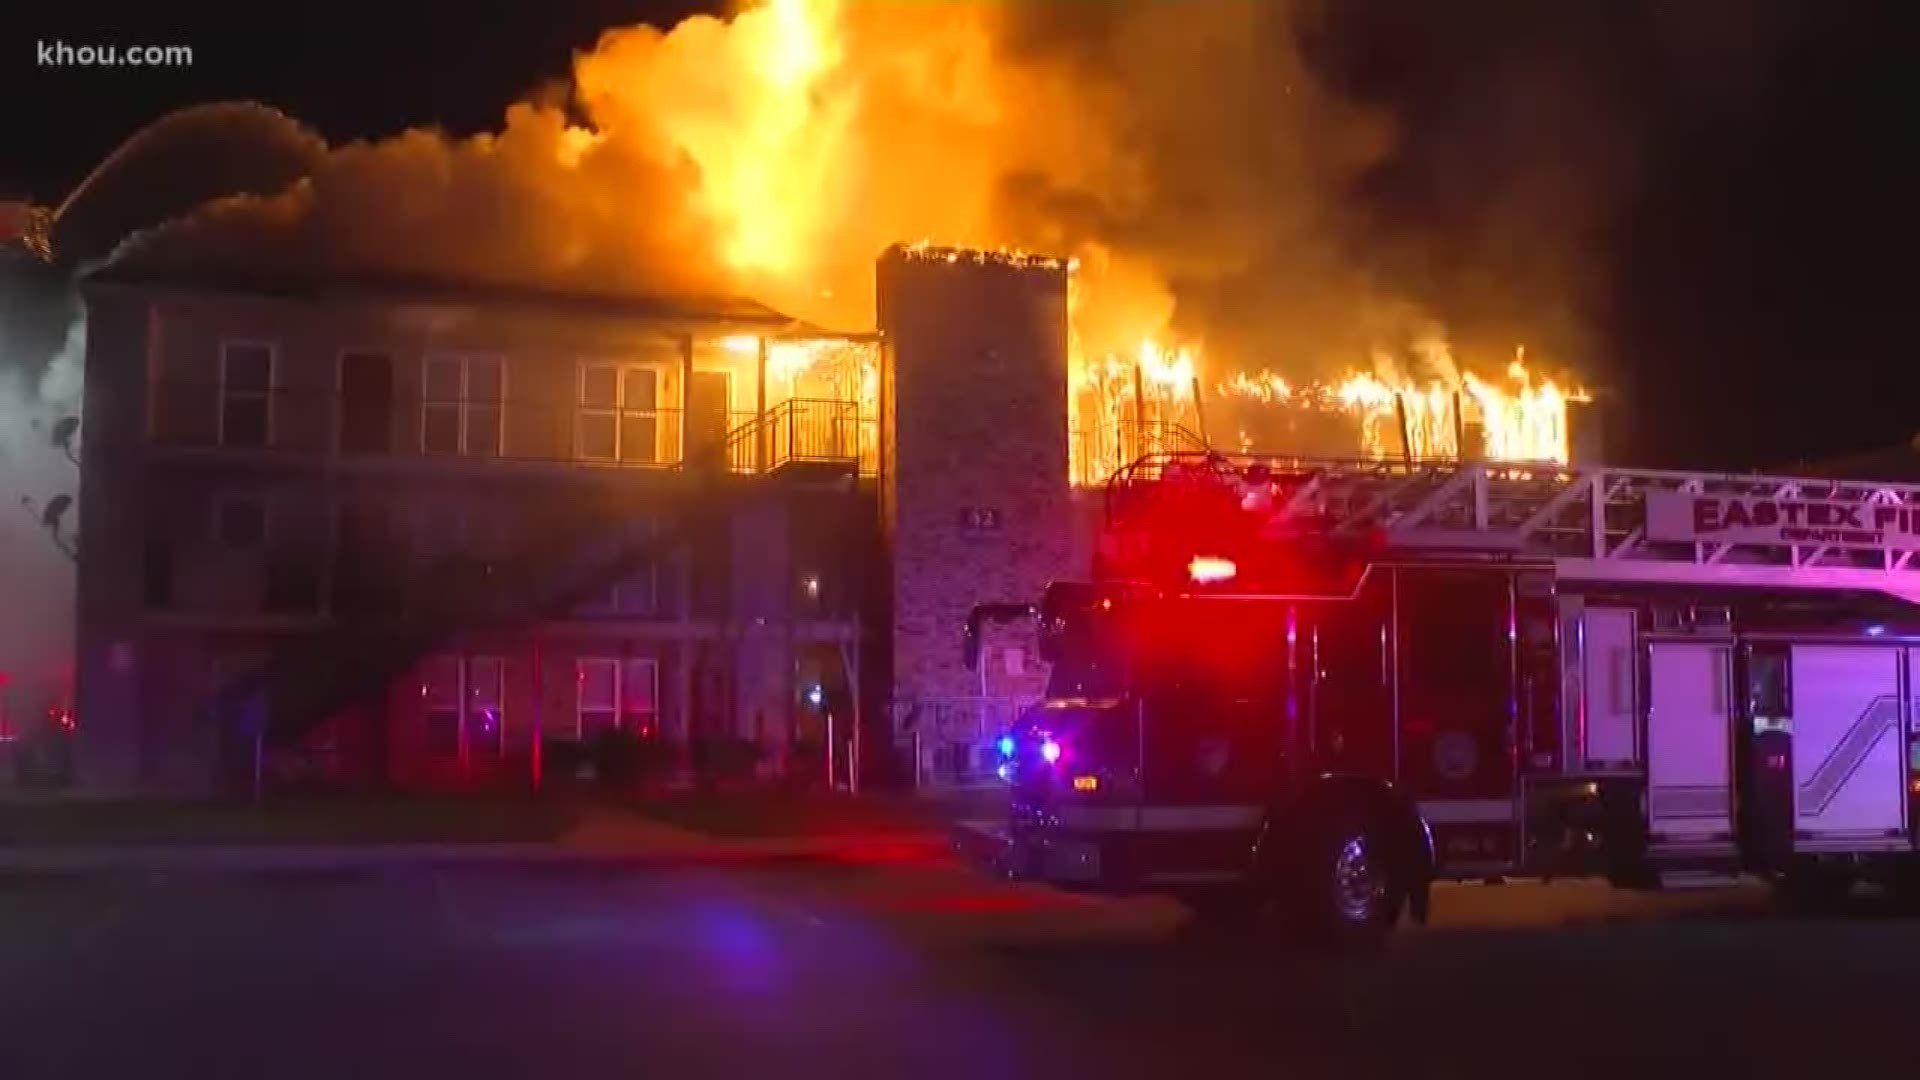 More than two dozen tenants lost their apartments overnight. It was a huge fire at the Haverstock Hill apartment complex, a place with a troubled past.